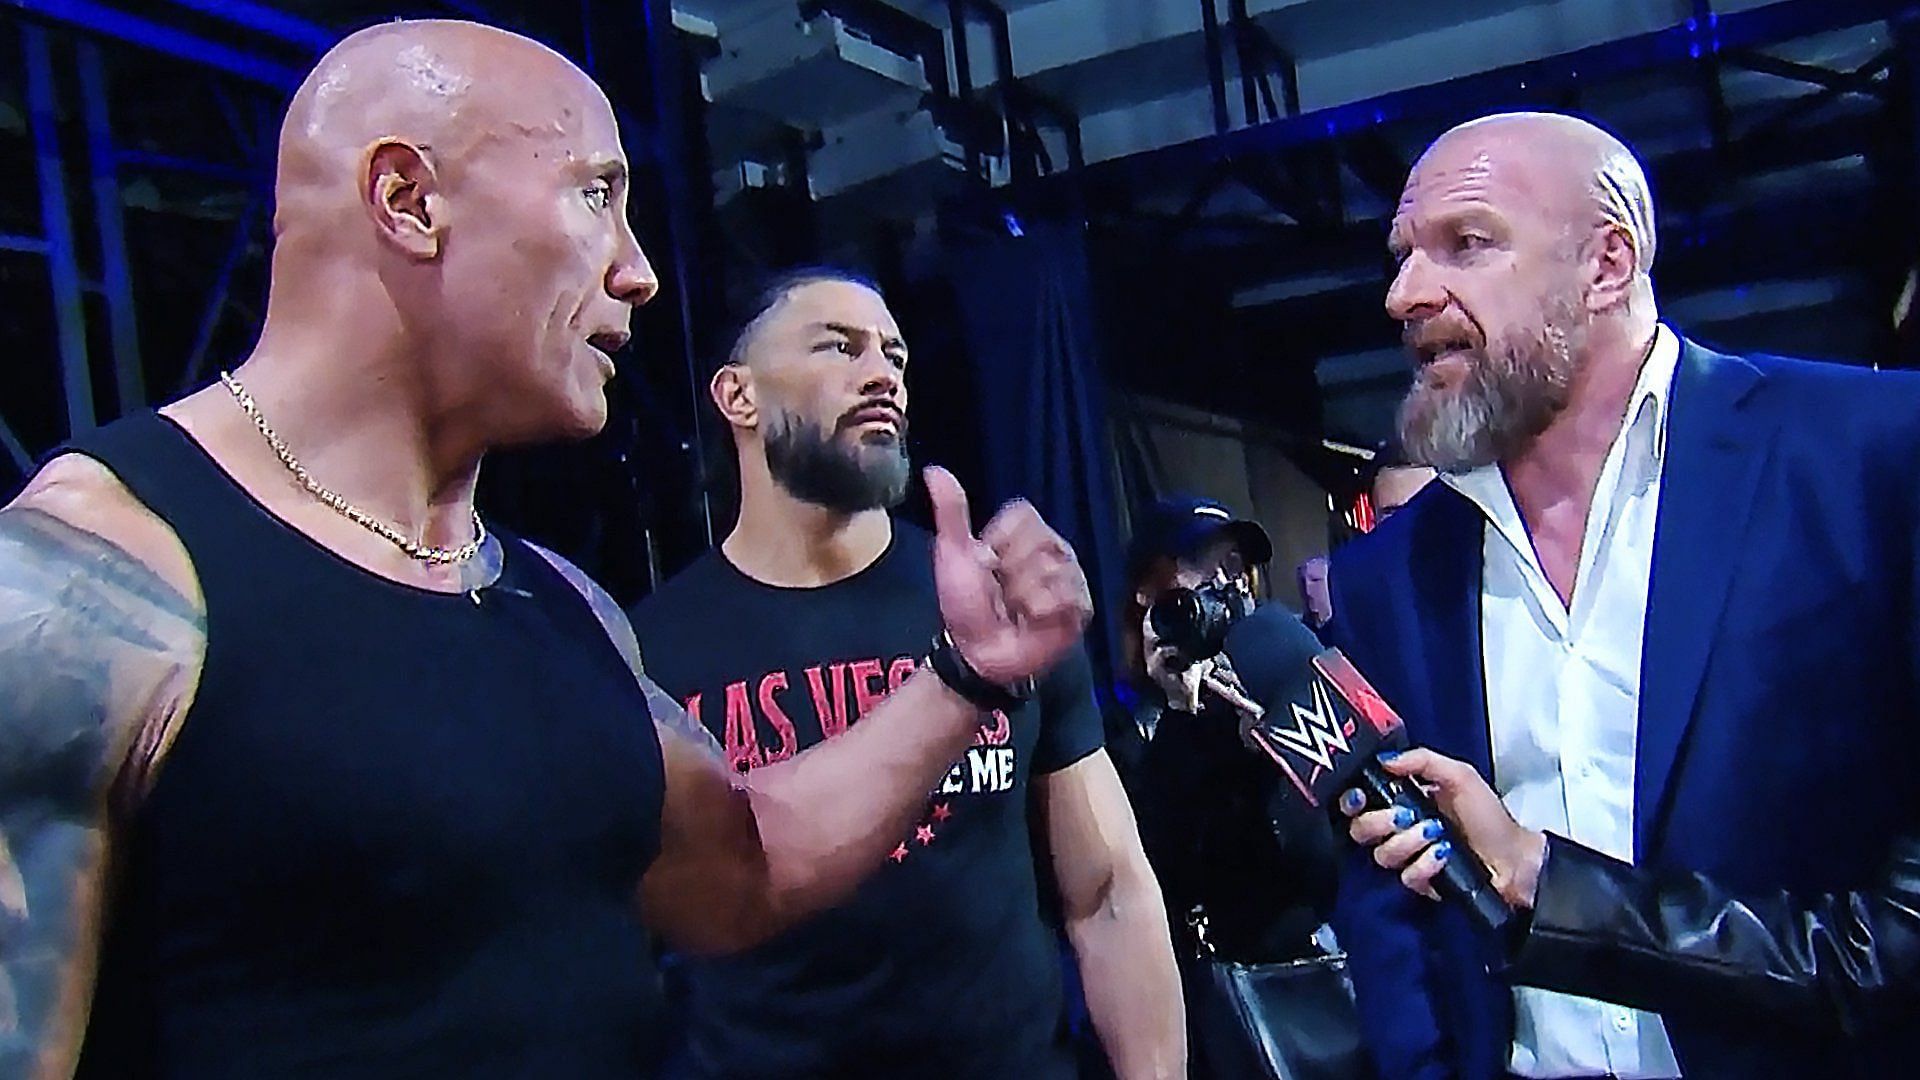 The Rock and Roman Reigns in a segment with Triple H